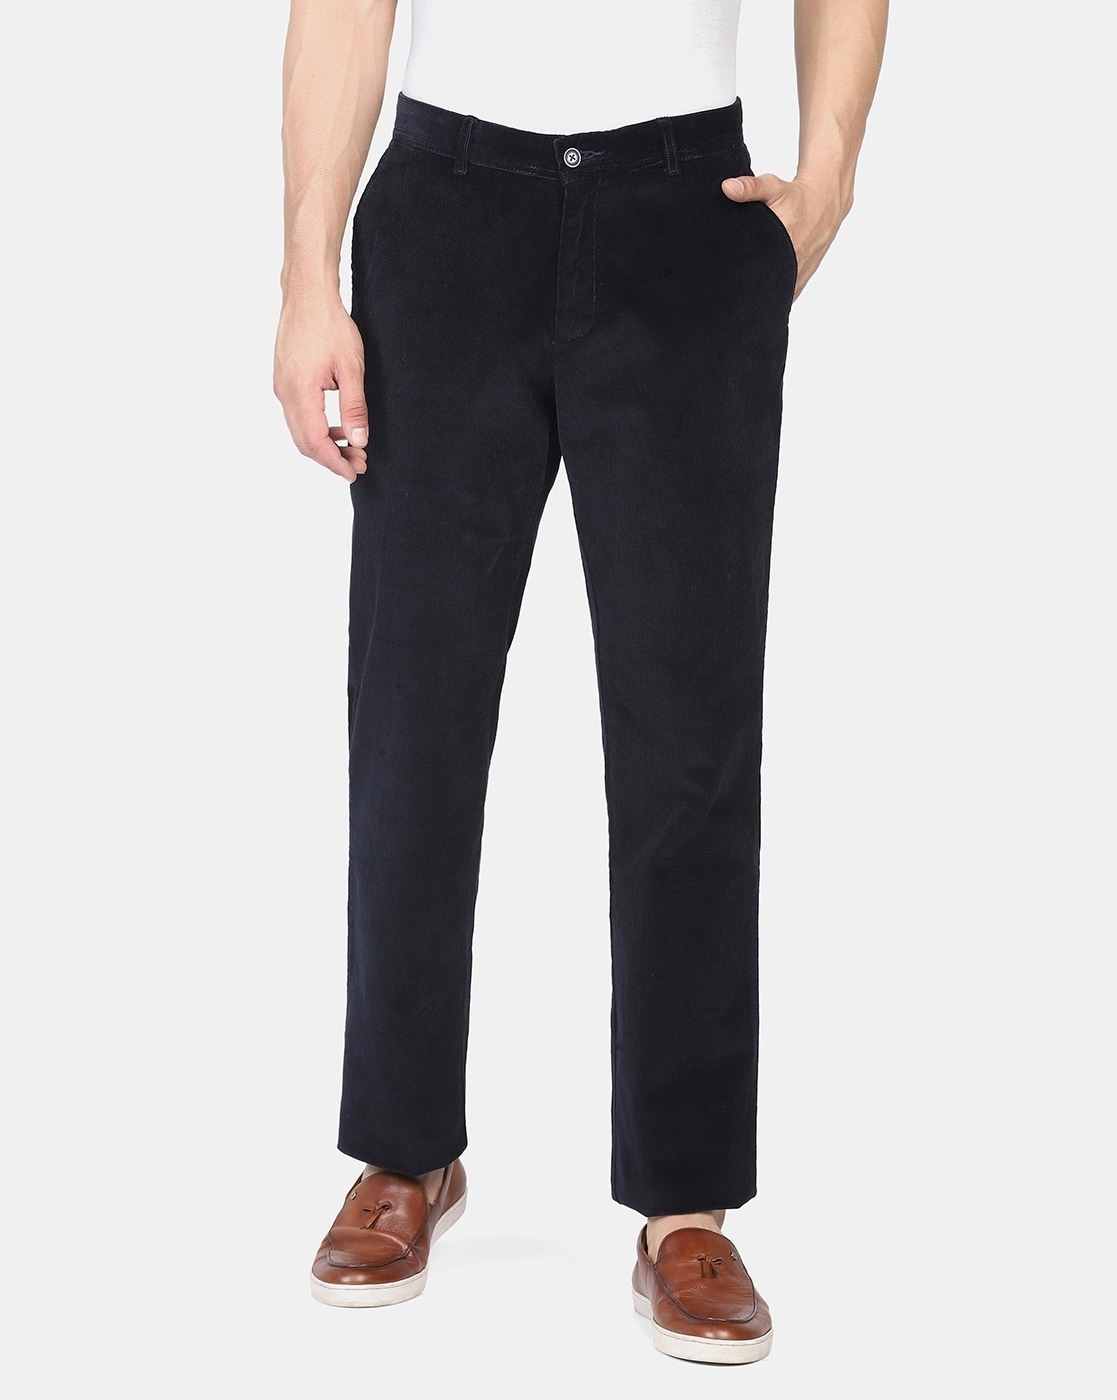 Black Mineral Washed Cotton Lantern Pants With Side Patch Pockets – Twist  Boutique